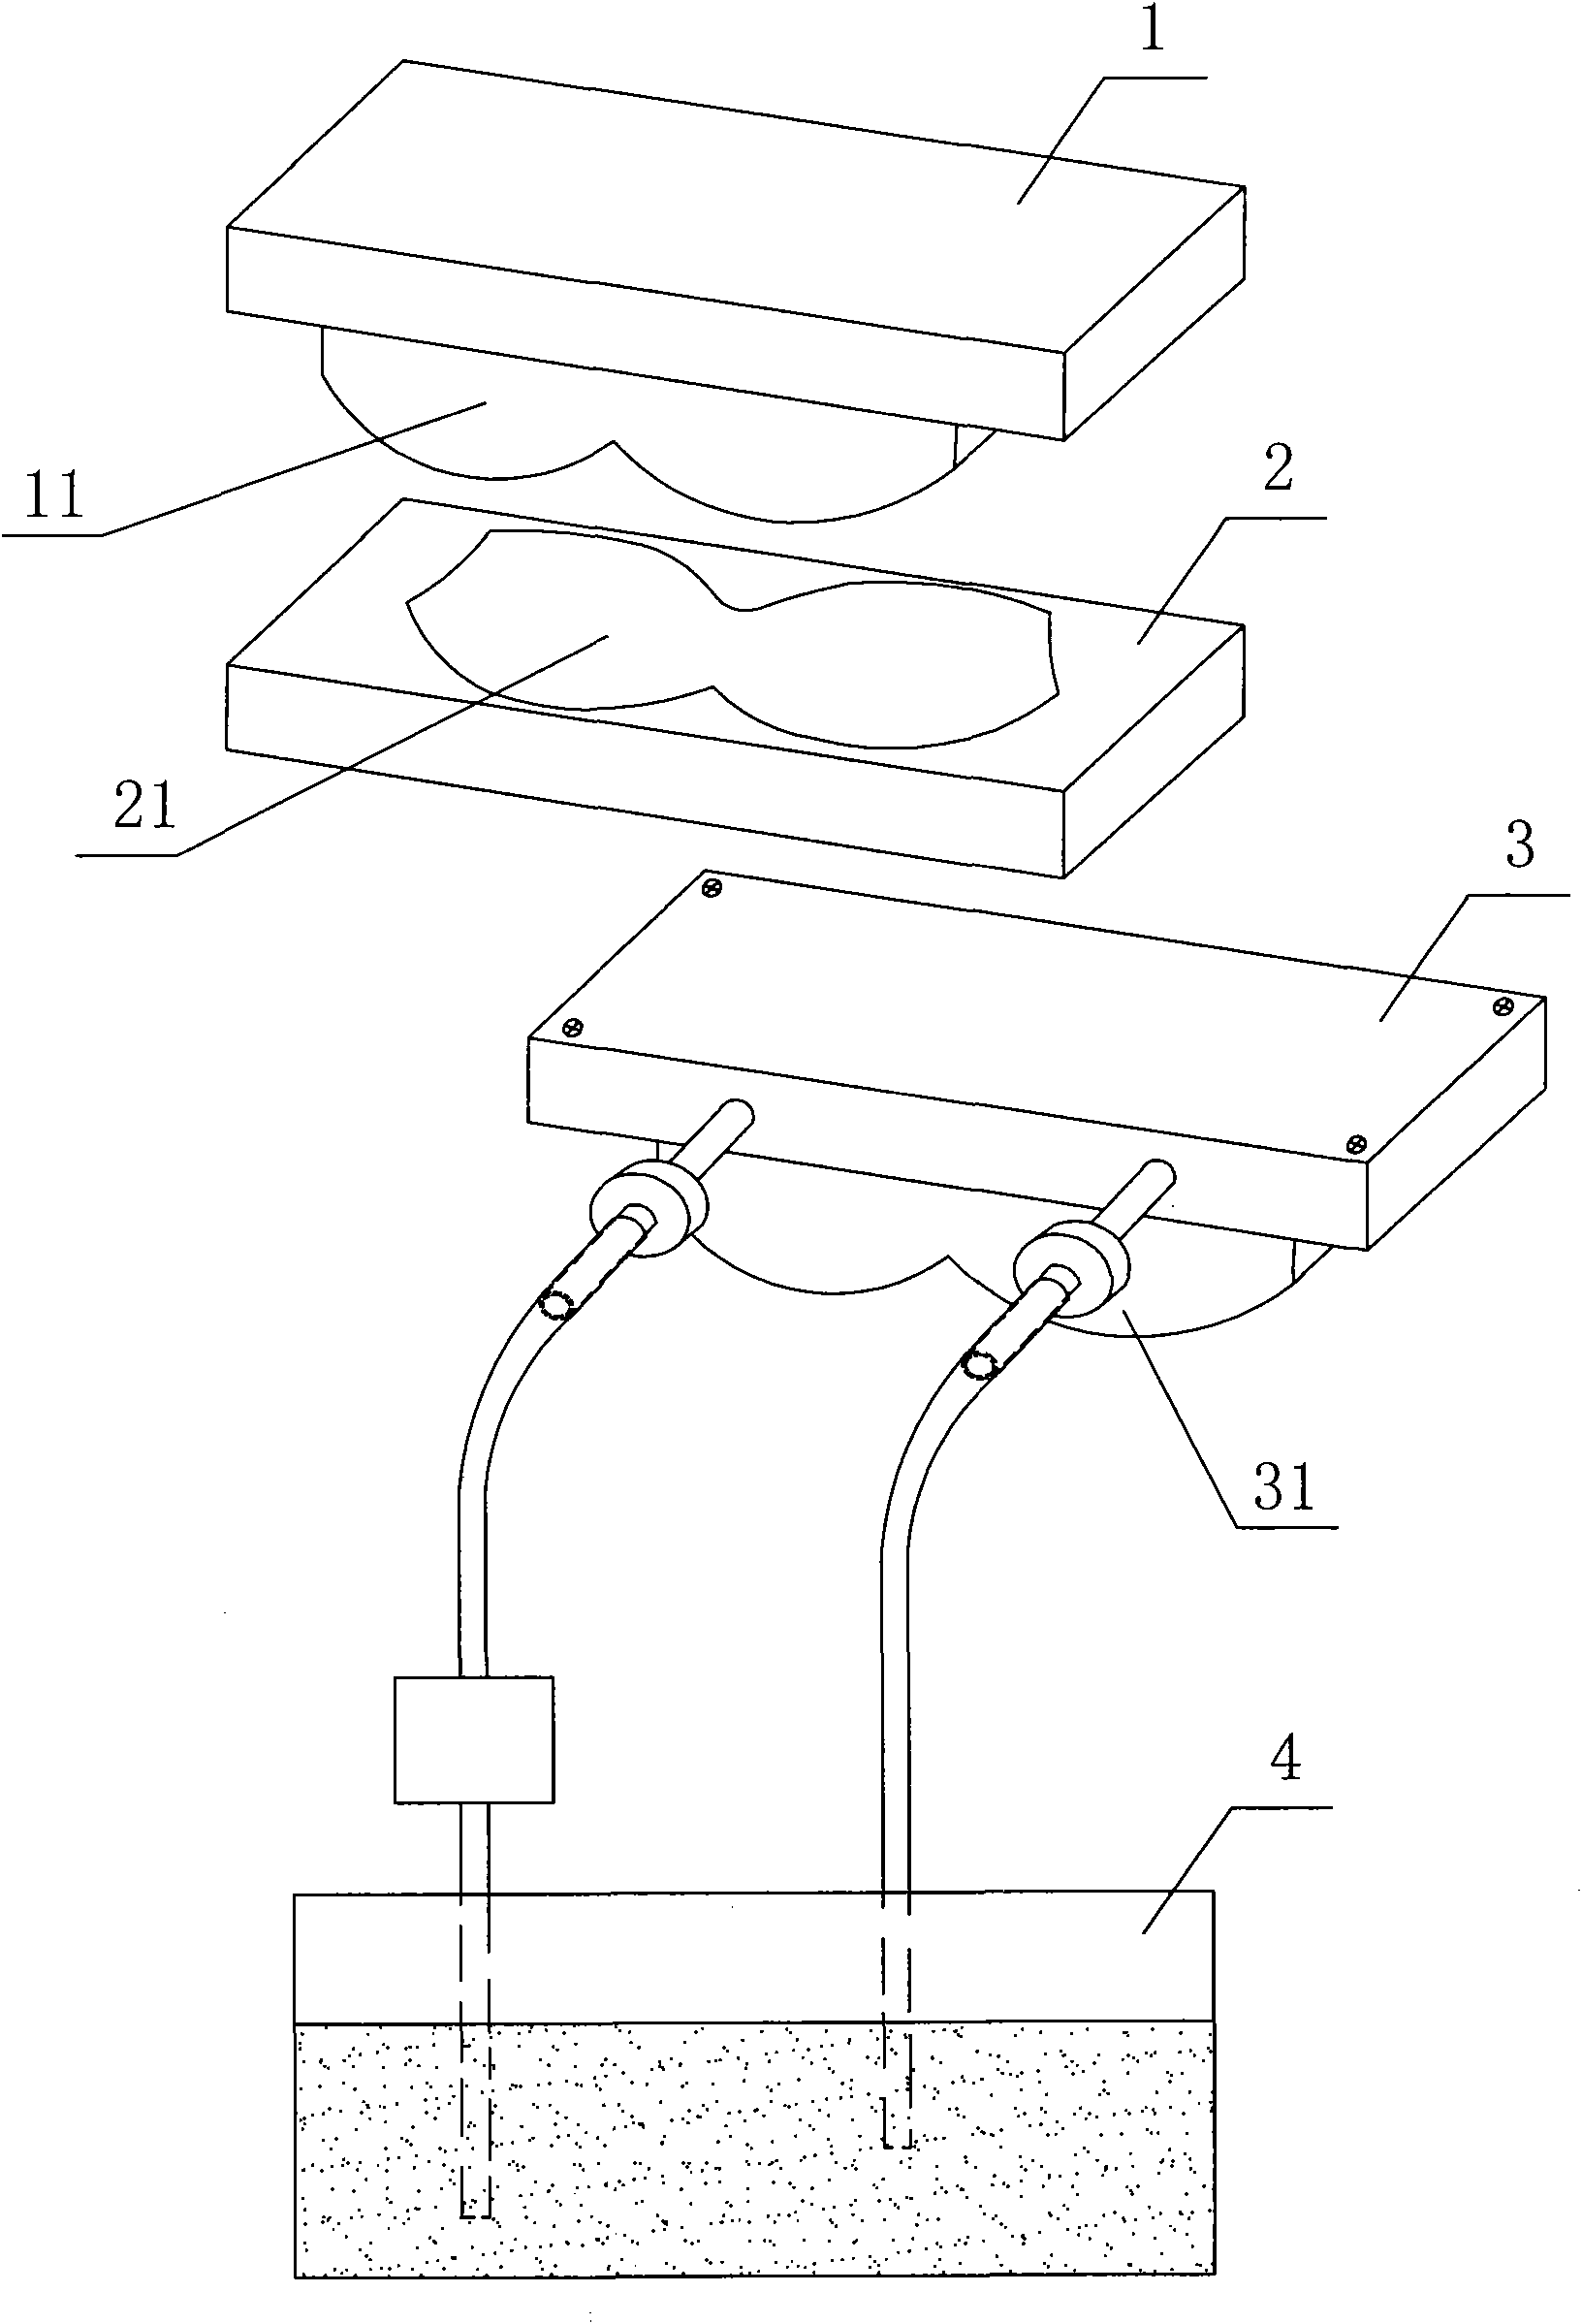 Process for die-pressing and shaping cup and die